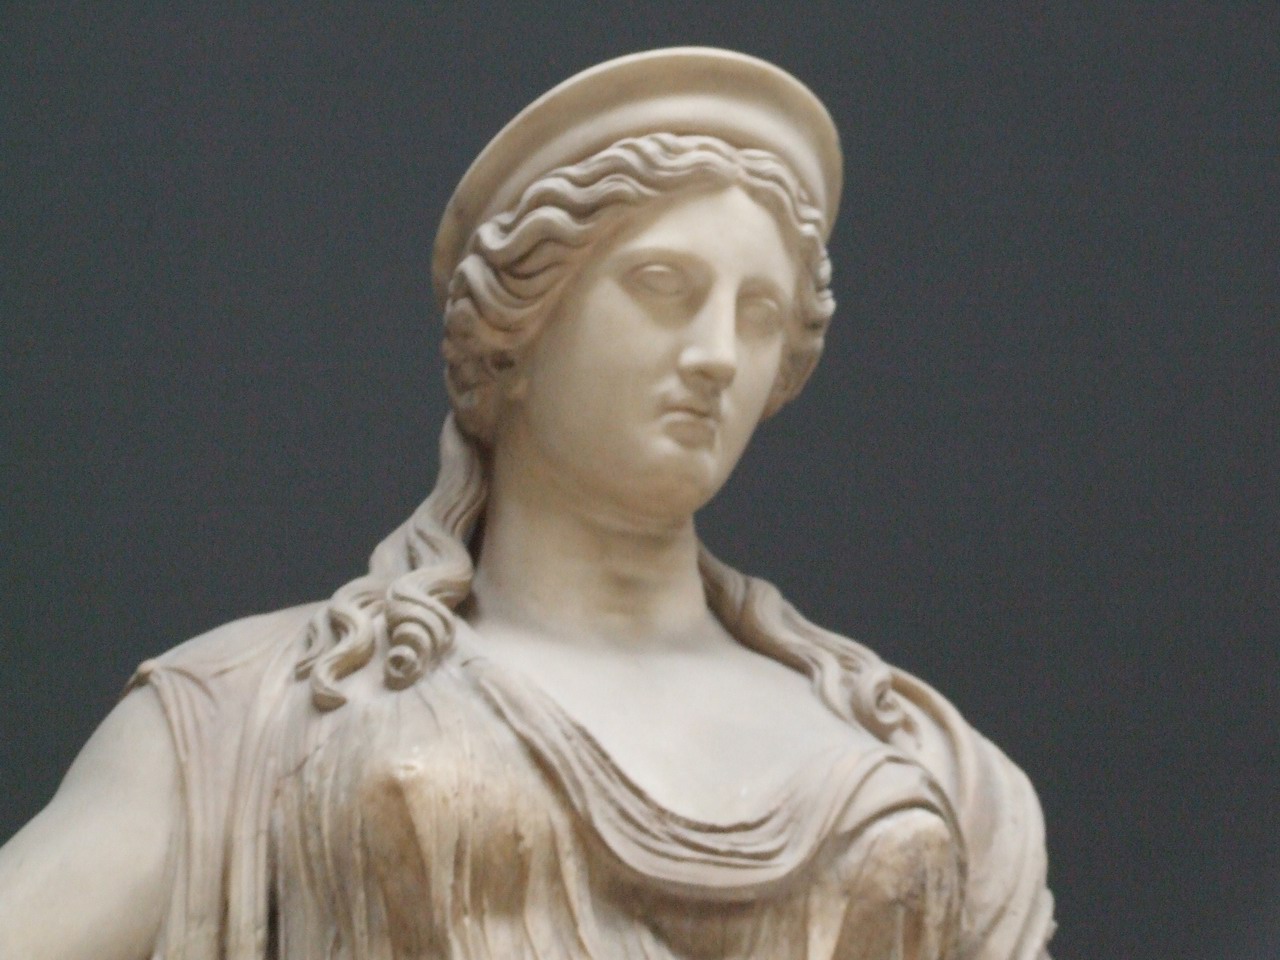 a statue of a woman in profile wearing a hat